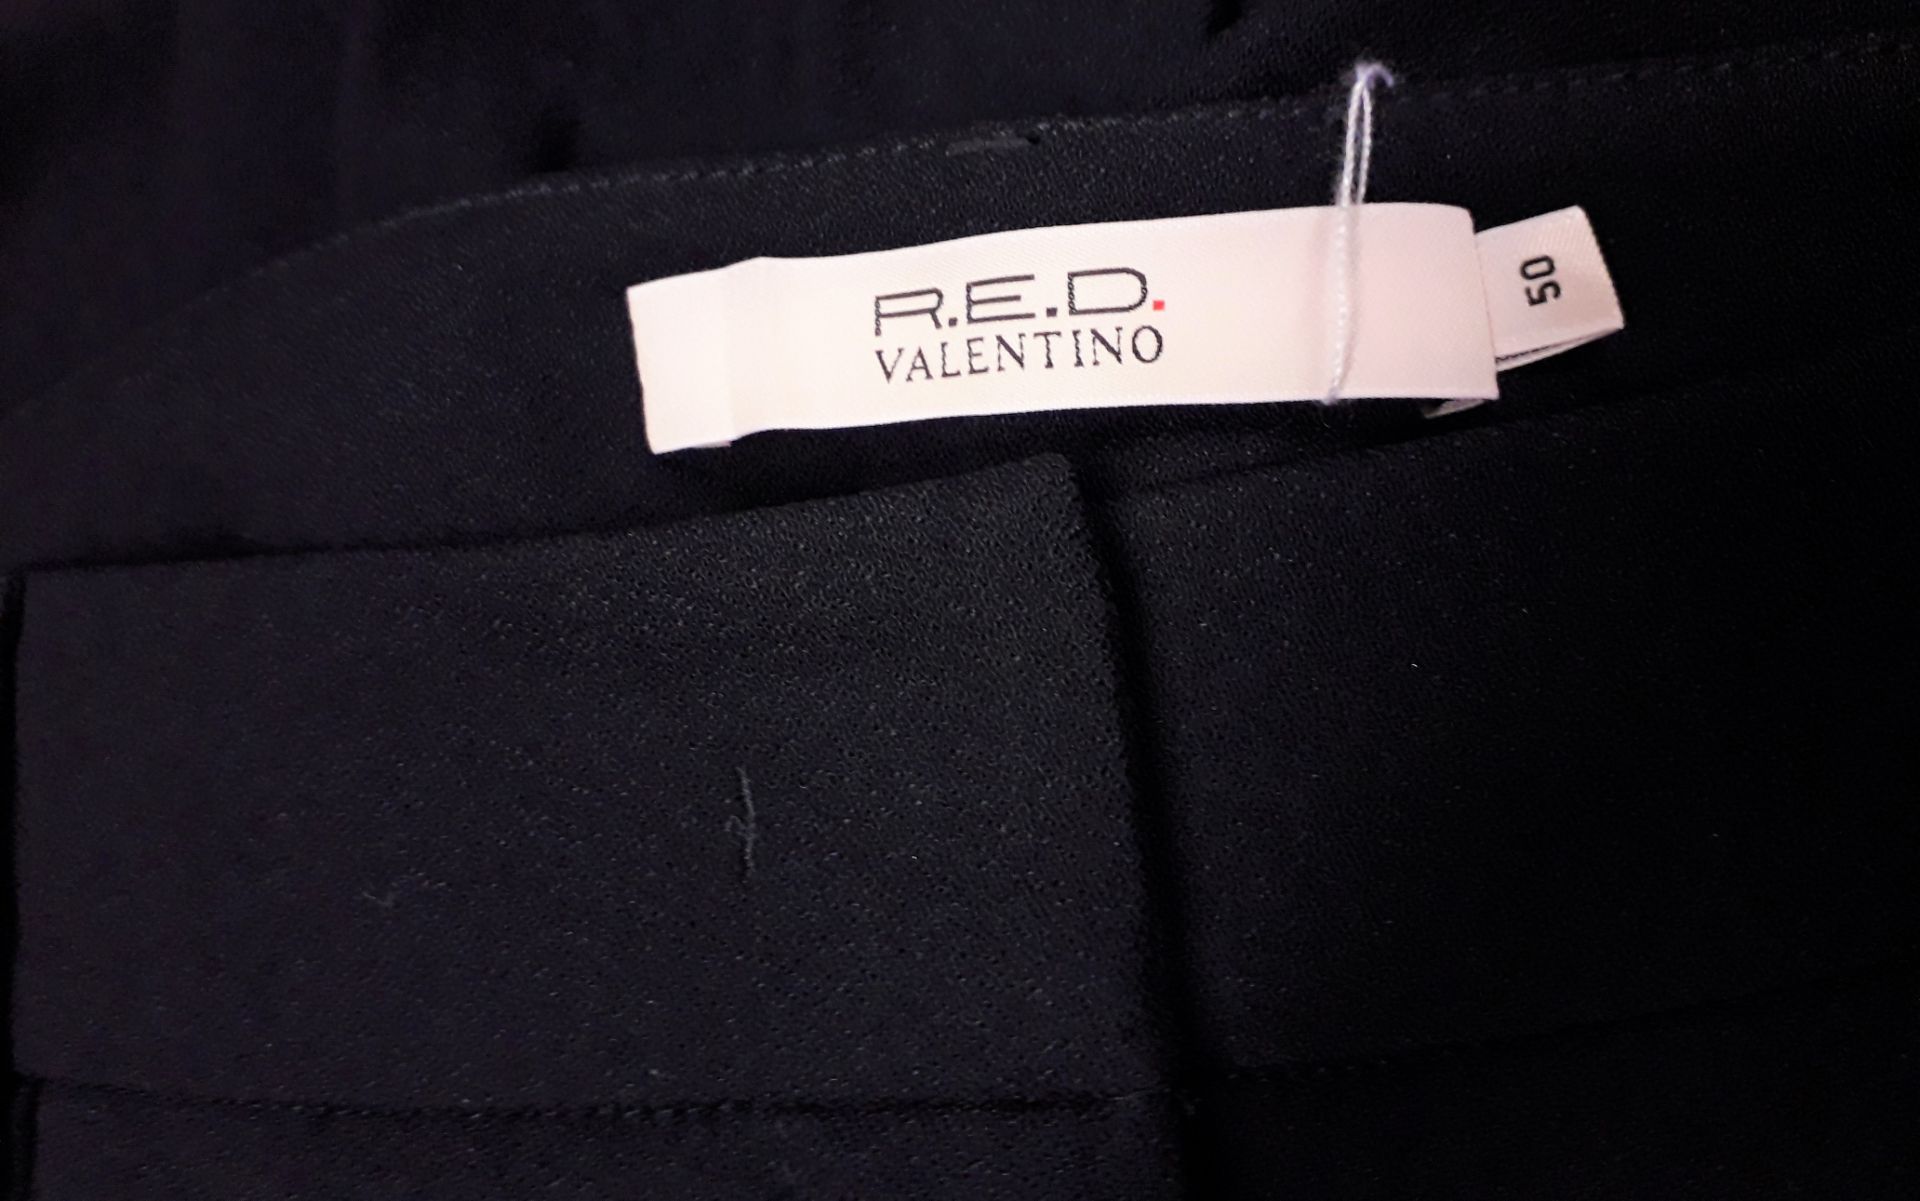 1 x Valentino R.E.D Navy Trousers - Size: 20 - Material: 58% Viscose, 40% Wool, 2% Elastane - From a - Image 3 of 4